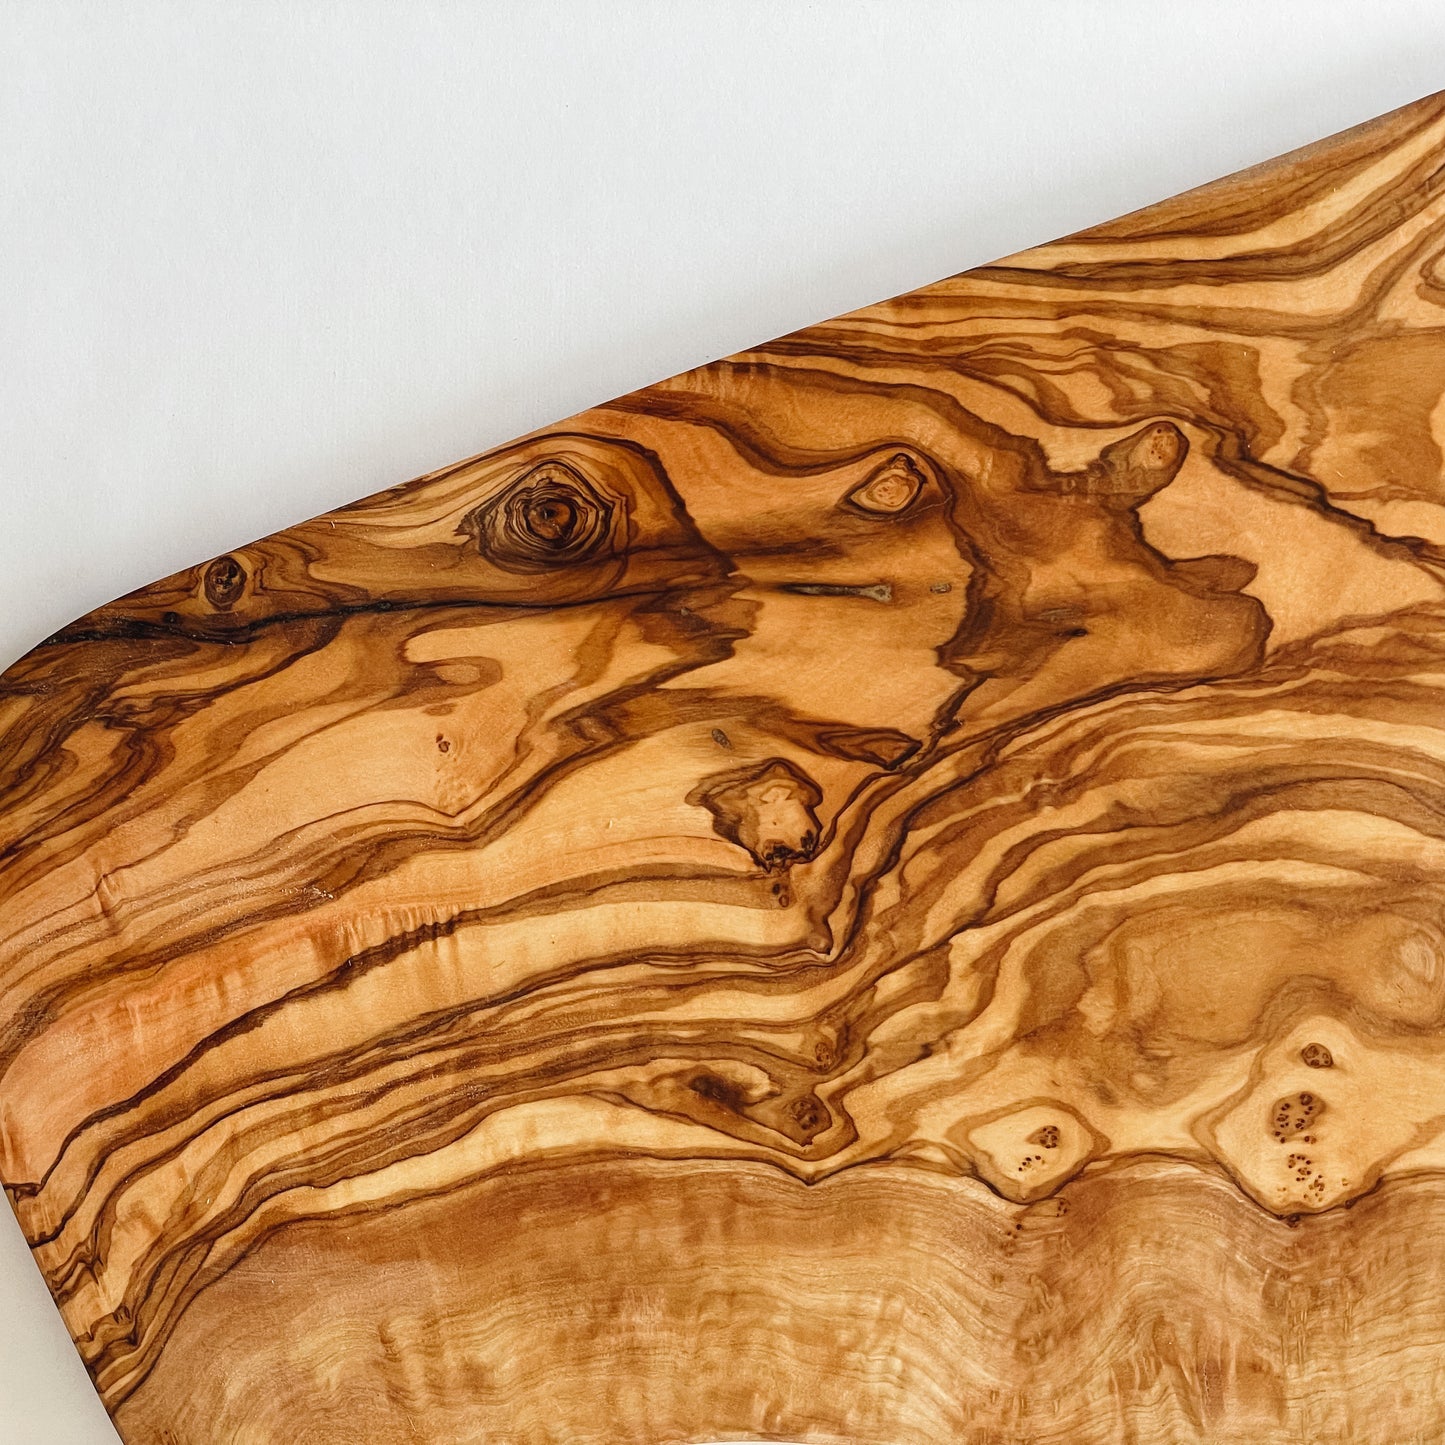 Natural Olive Wood Cheese Board